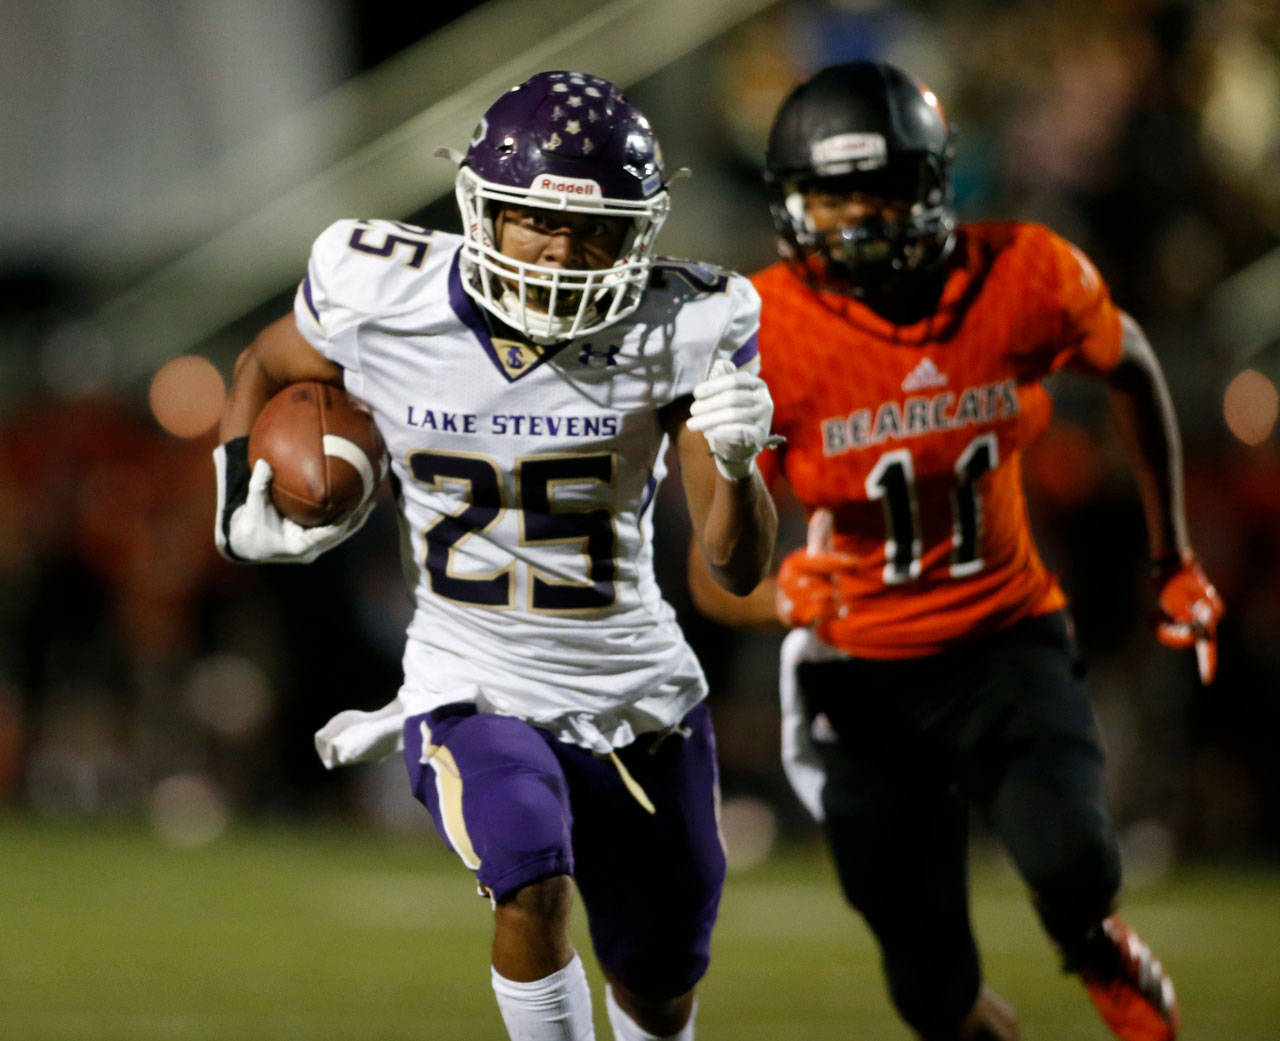 Lake Stevens’ Kasen Kinchen runs in for a 50-yard touchdown reception during a game against Monroe on Sept. 14 in Monroe. (Andy Bronson / The Herald)